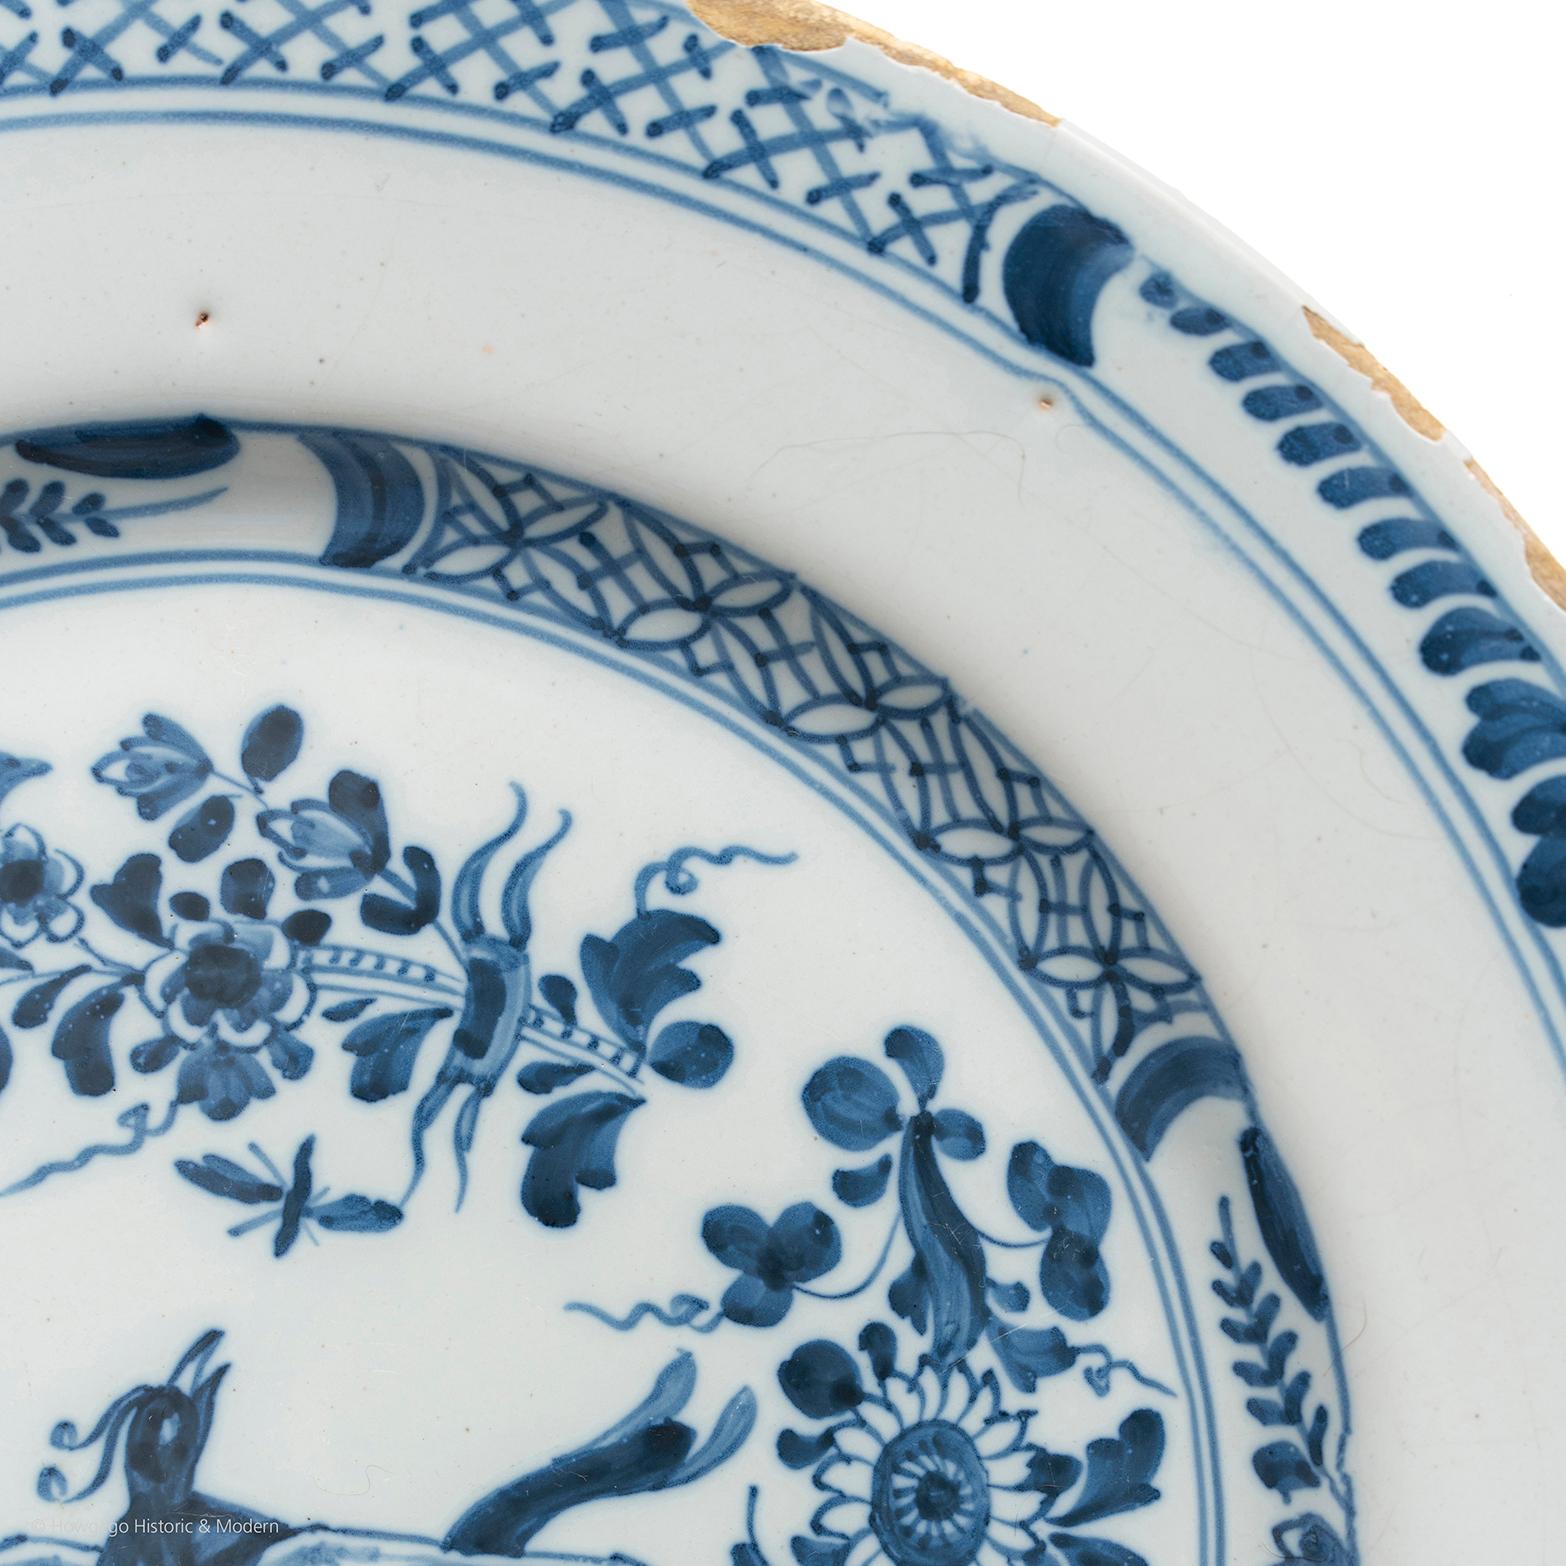 Hand-Painted Plate, Delftware, English, London, Blue White Bird Chinoiserie Fantasy For Sale